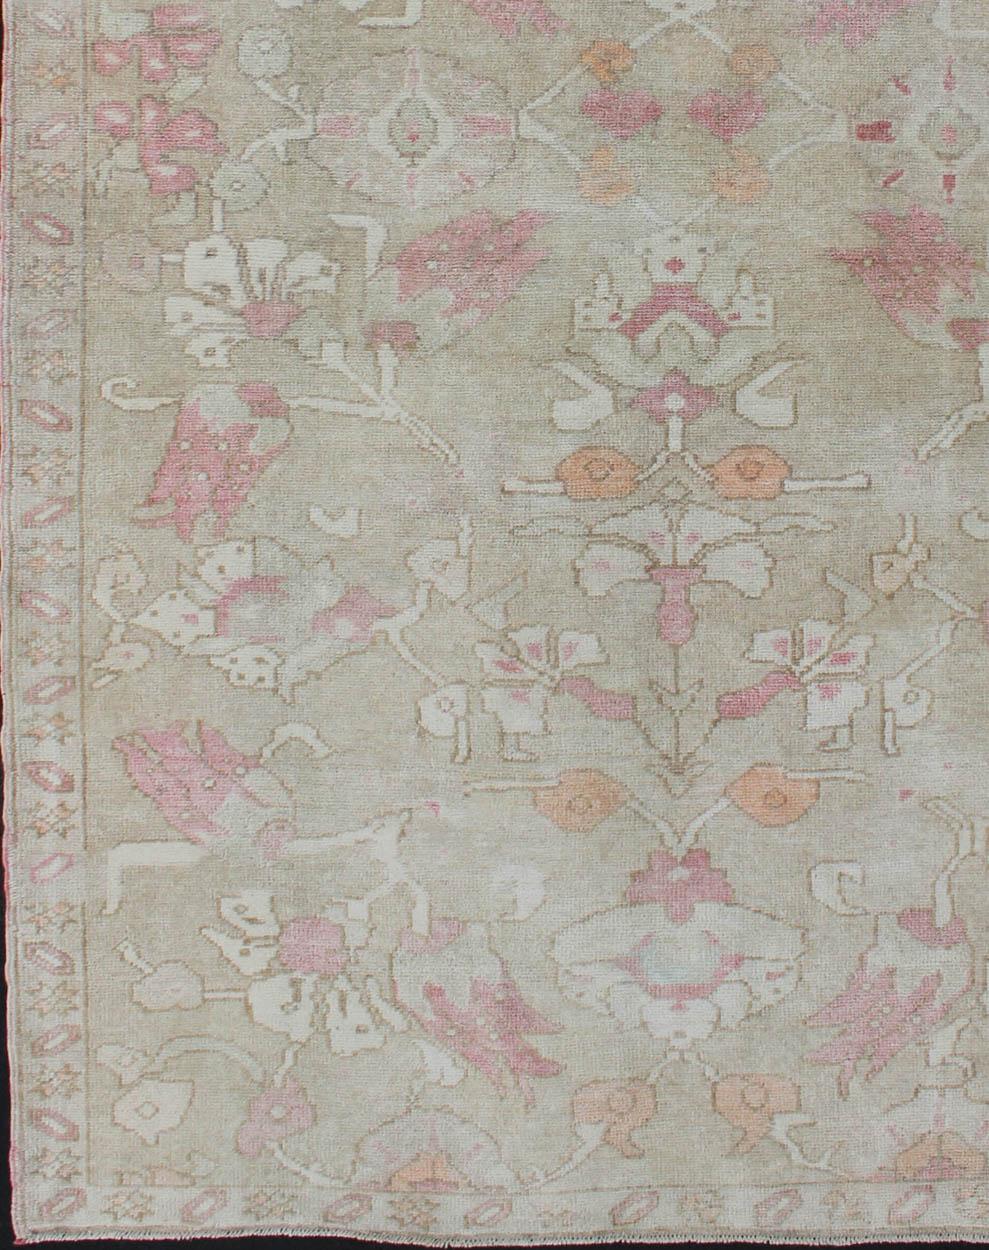 Pink, apricot, and ivory vintage rug with flower pattern, rug en-112809, country of origin / type: Turkey / Oushak, circa 1950

This vintage Tulu carpet features a beautiful flower pattern, set atop a greenish-gray background and rendered in tones